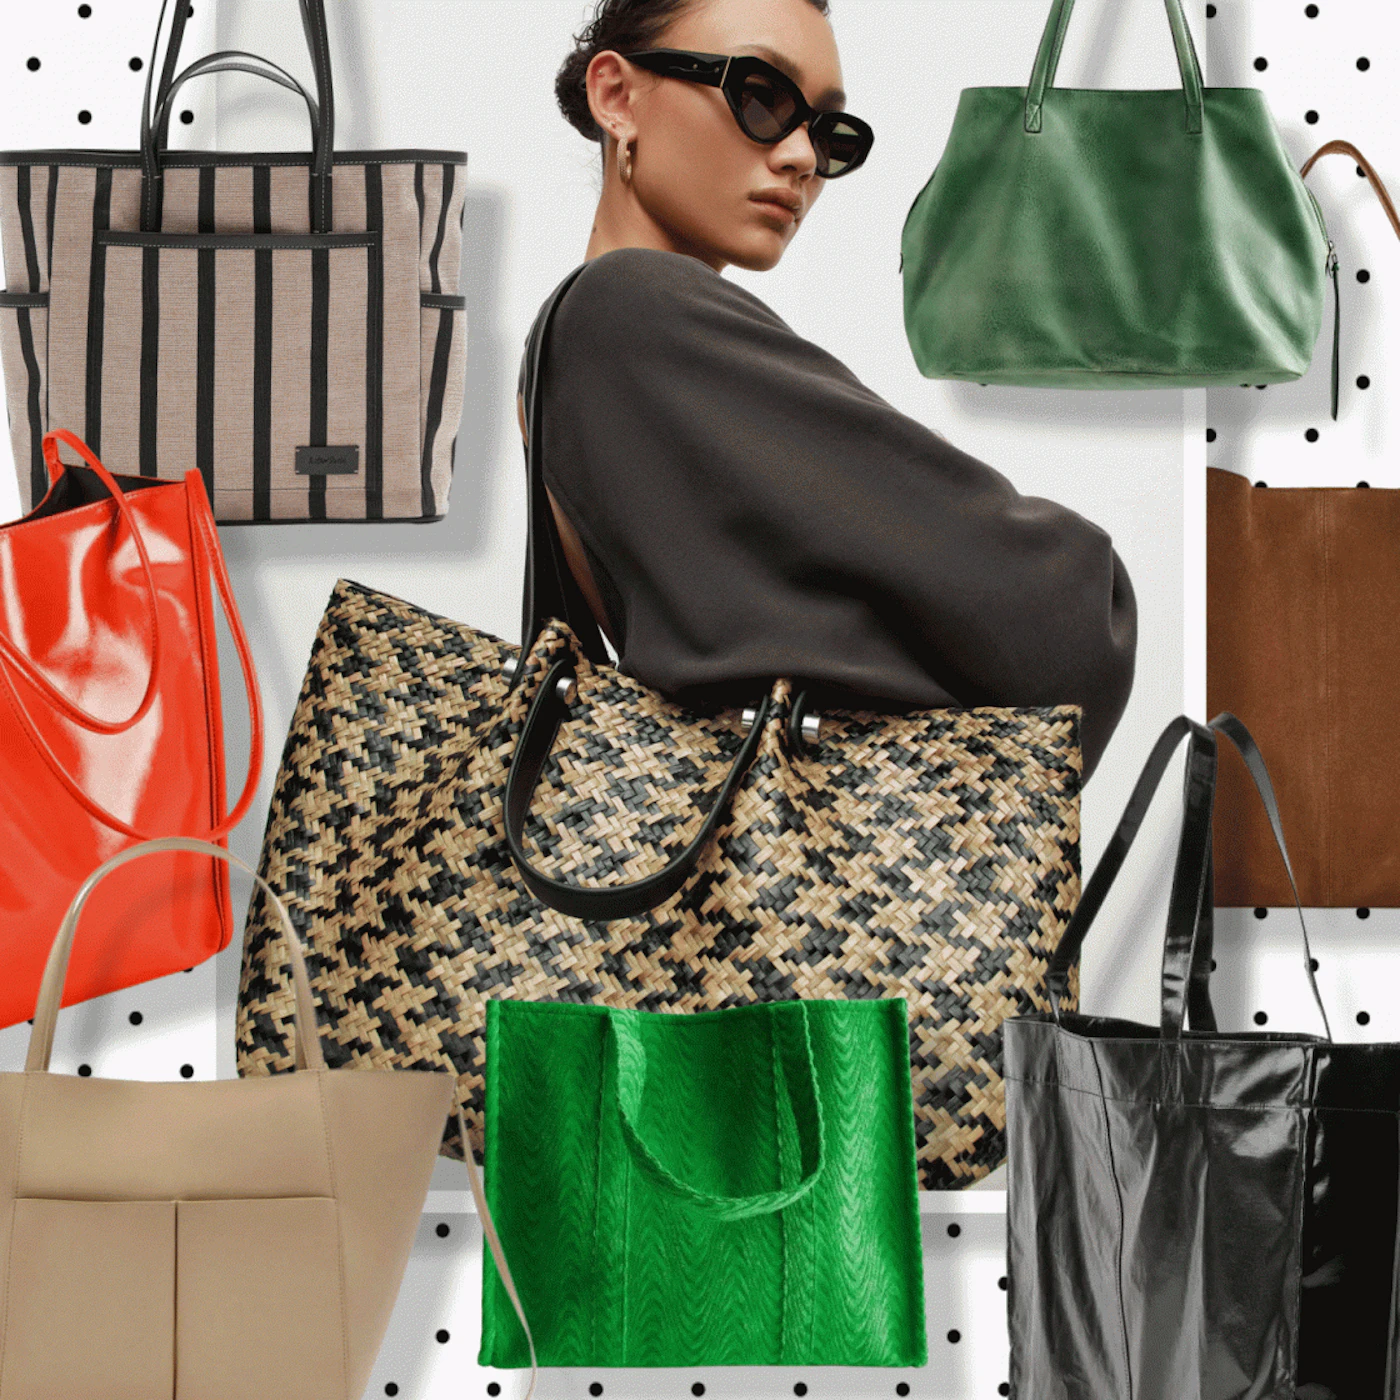 XL tote bags that are certainly stylish